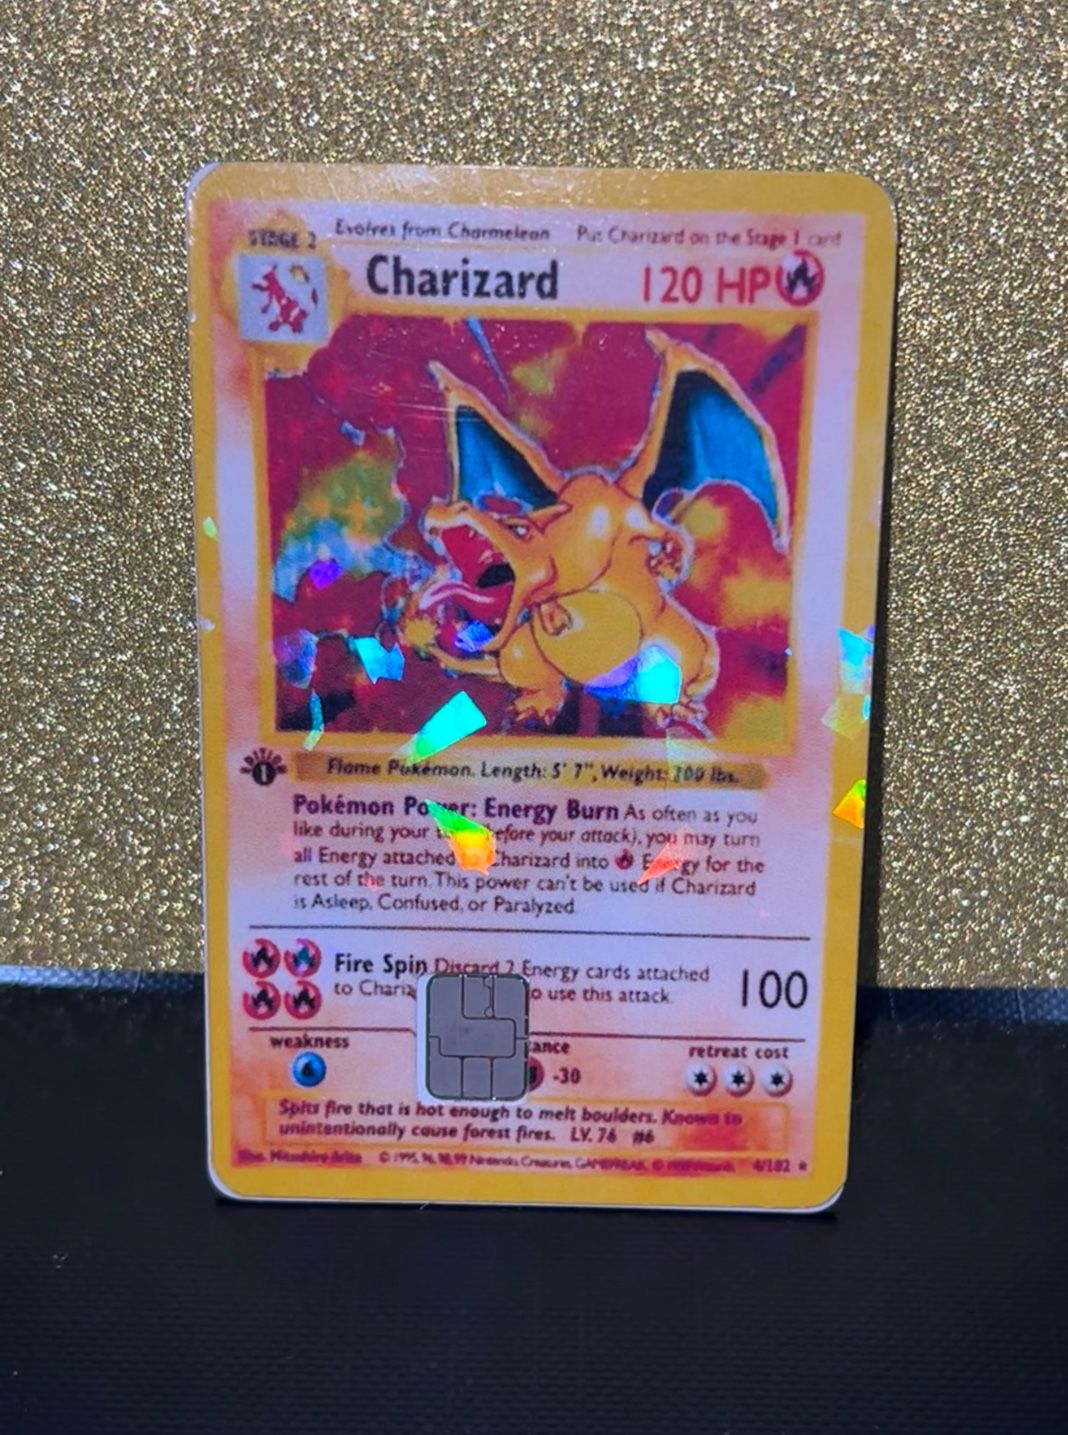 Holographic Charizard Pokemon 1st Edition CREDIT CARD SKIN / Decal Sticker